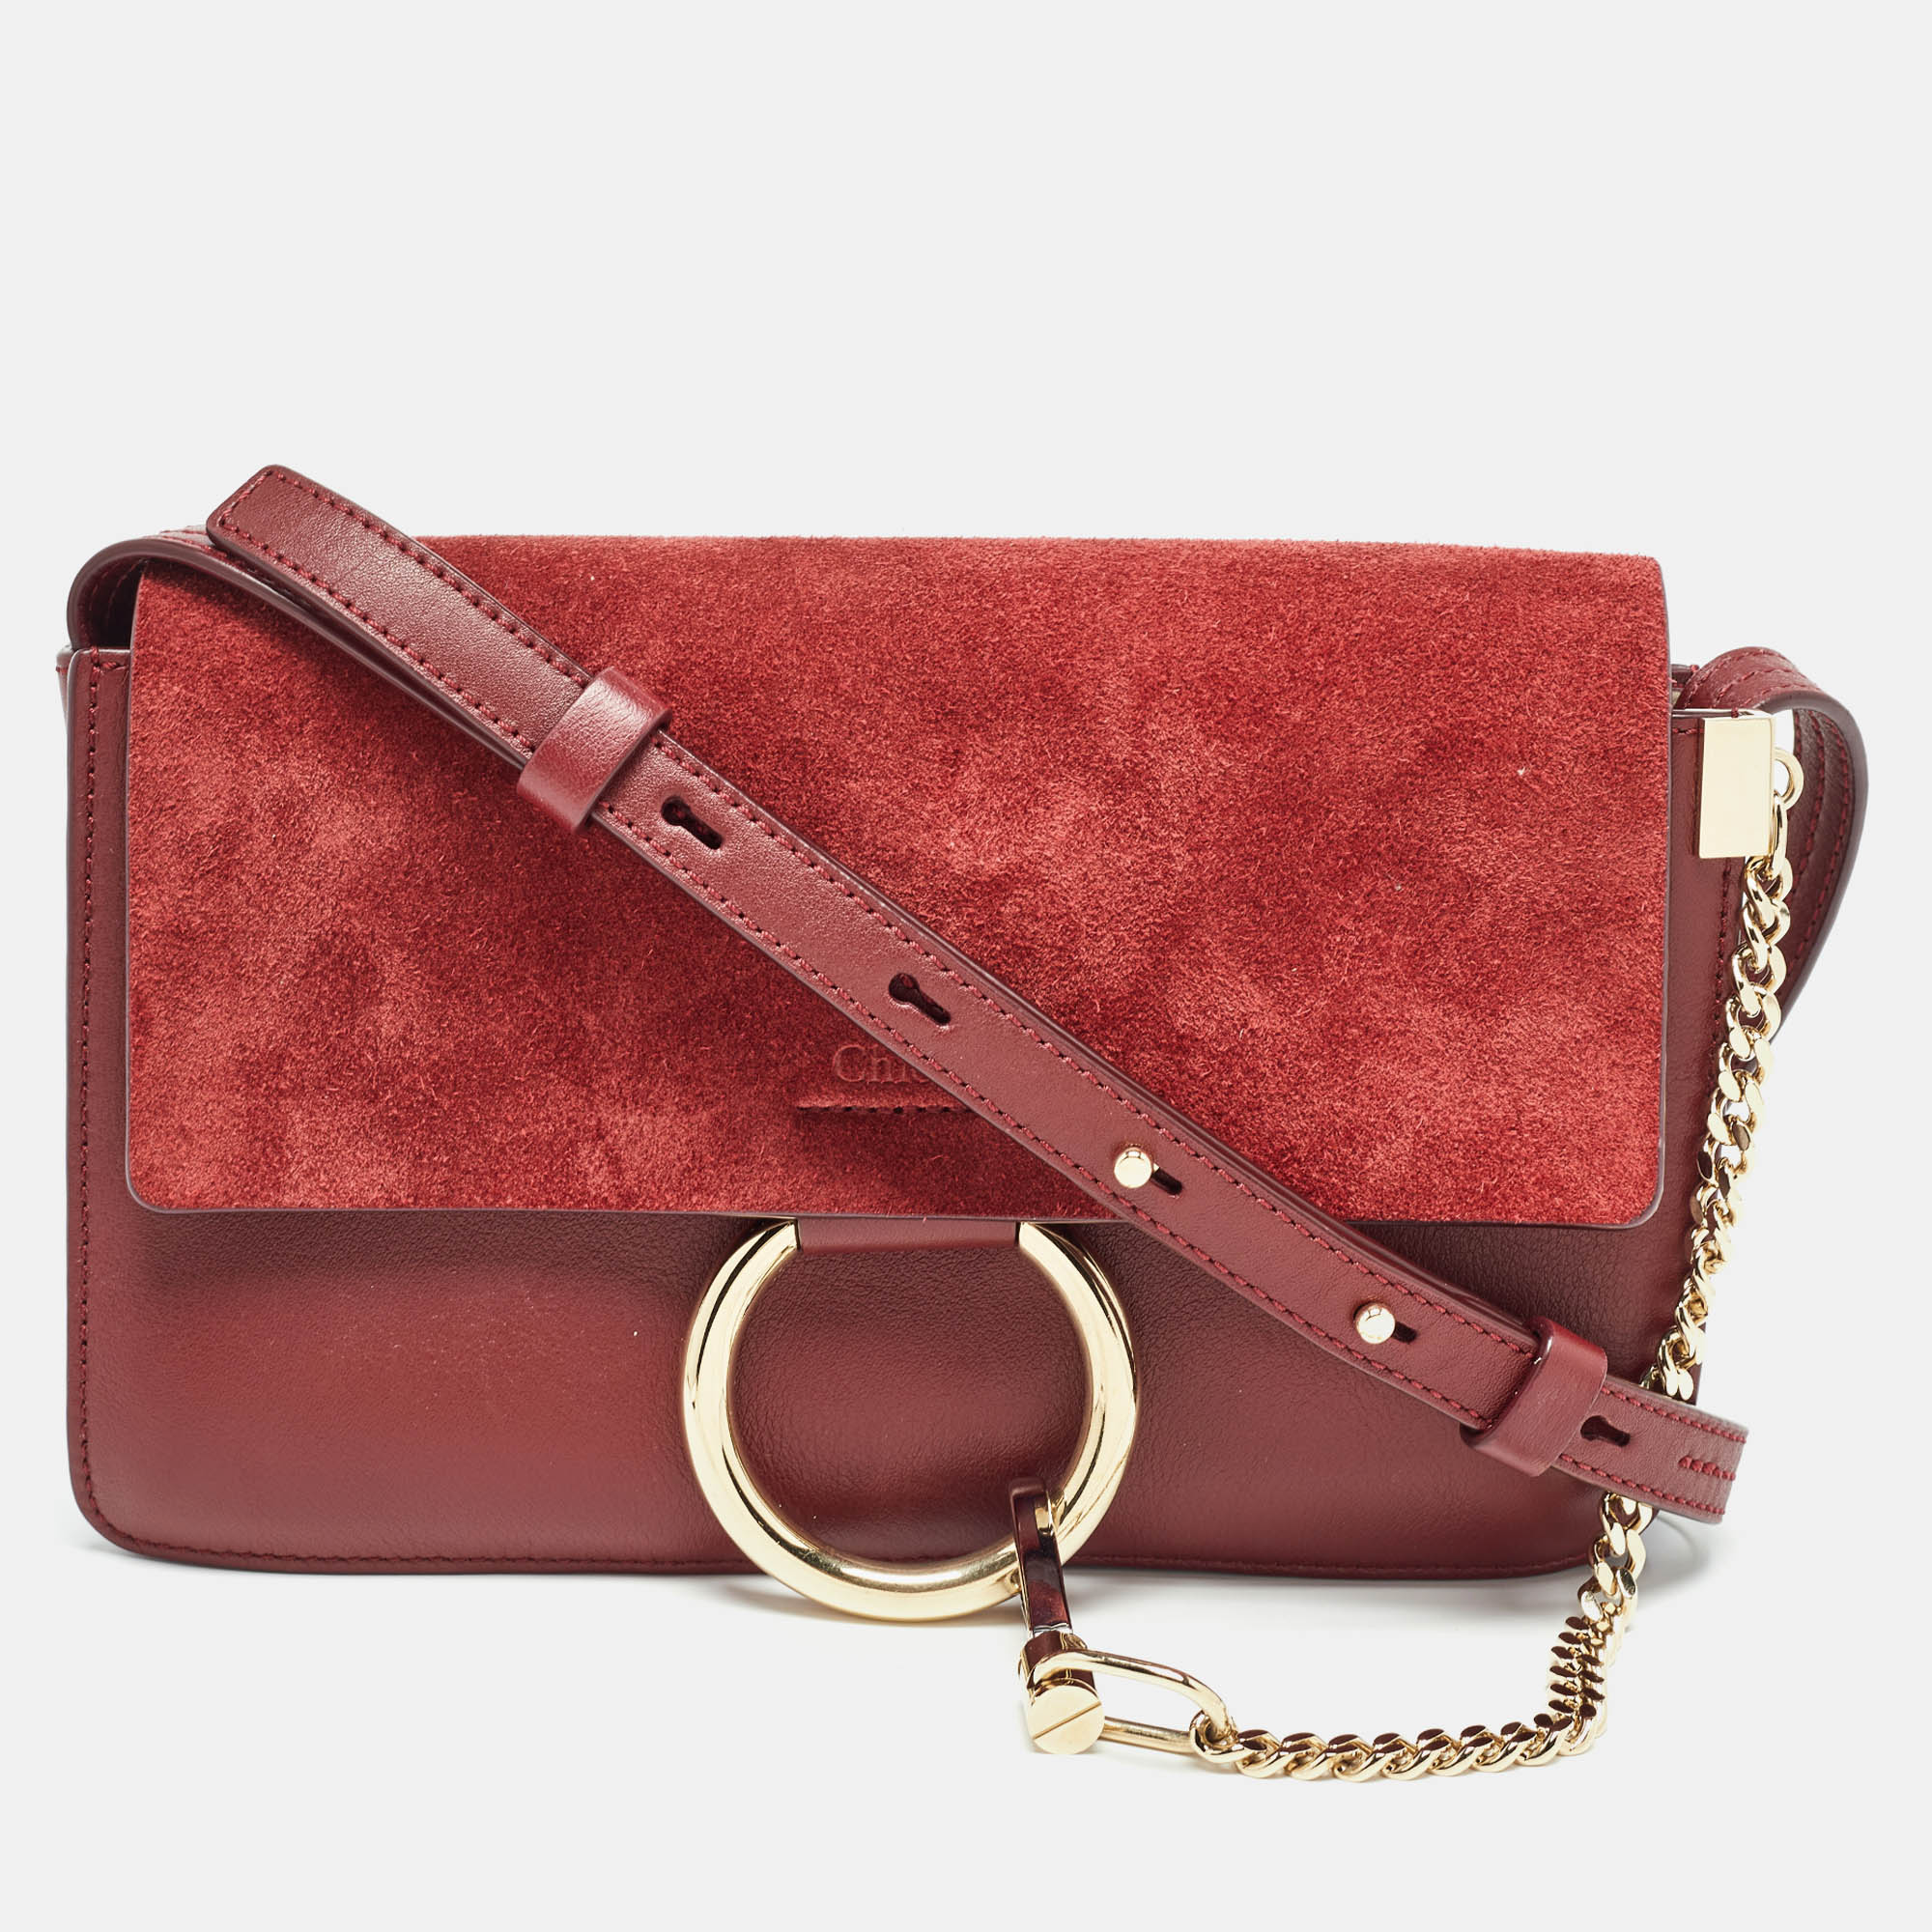 Chloe burgundy leather and suede small faye shoulder bag